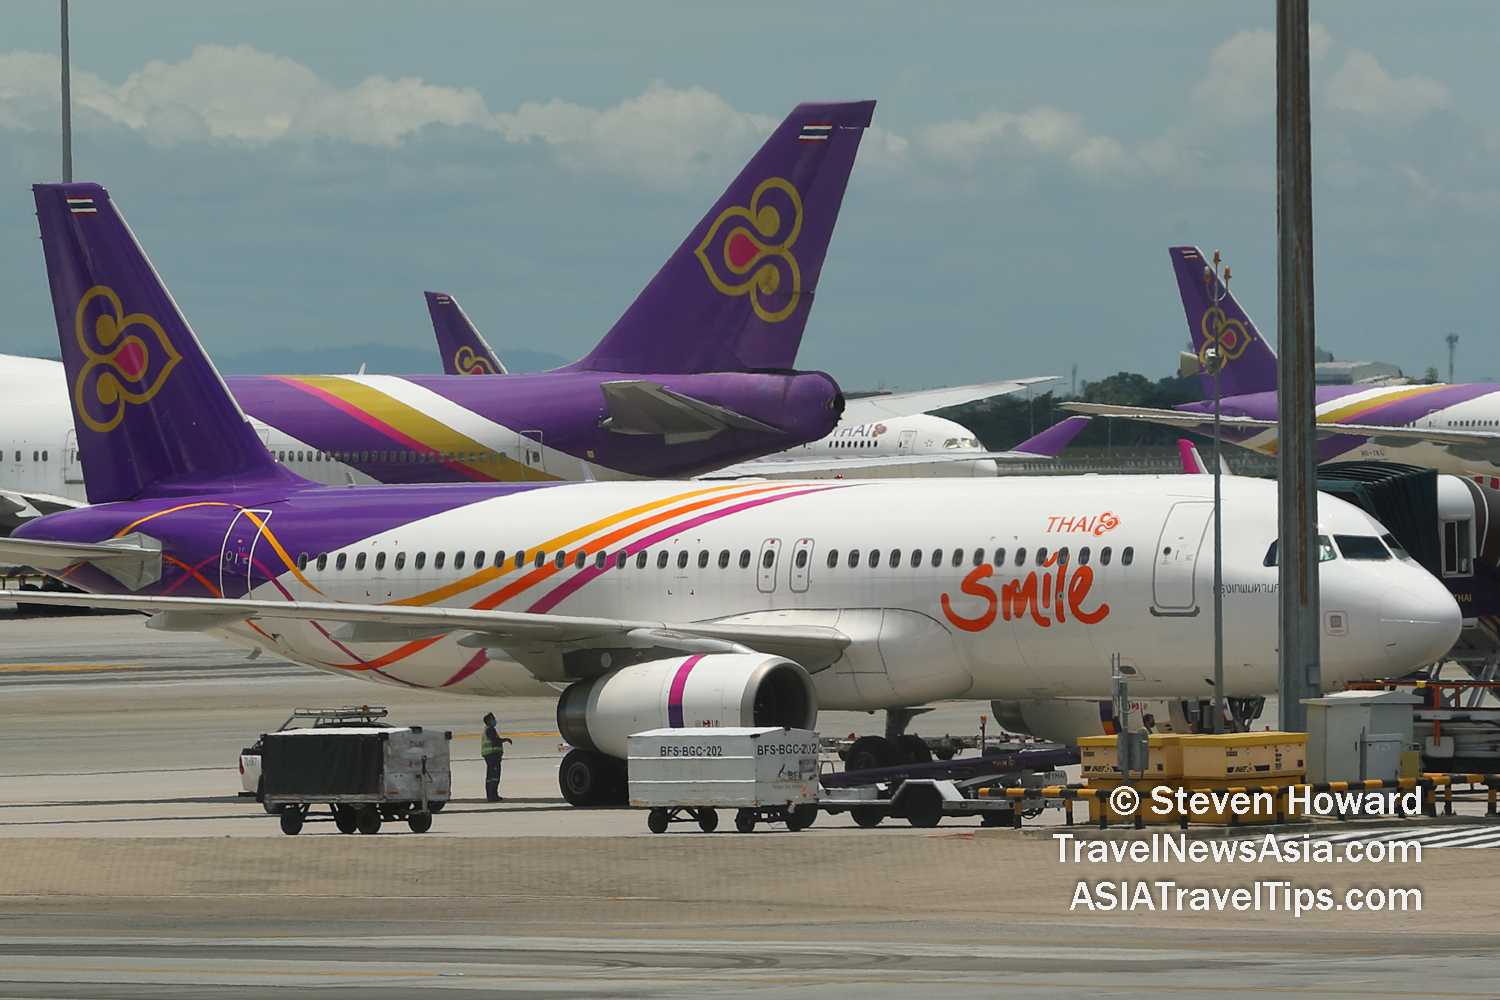 Asia Pacific Airlines Carried Just 1 Million Passengers in August